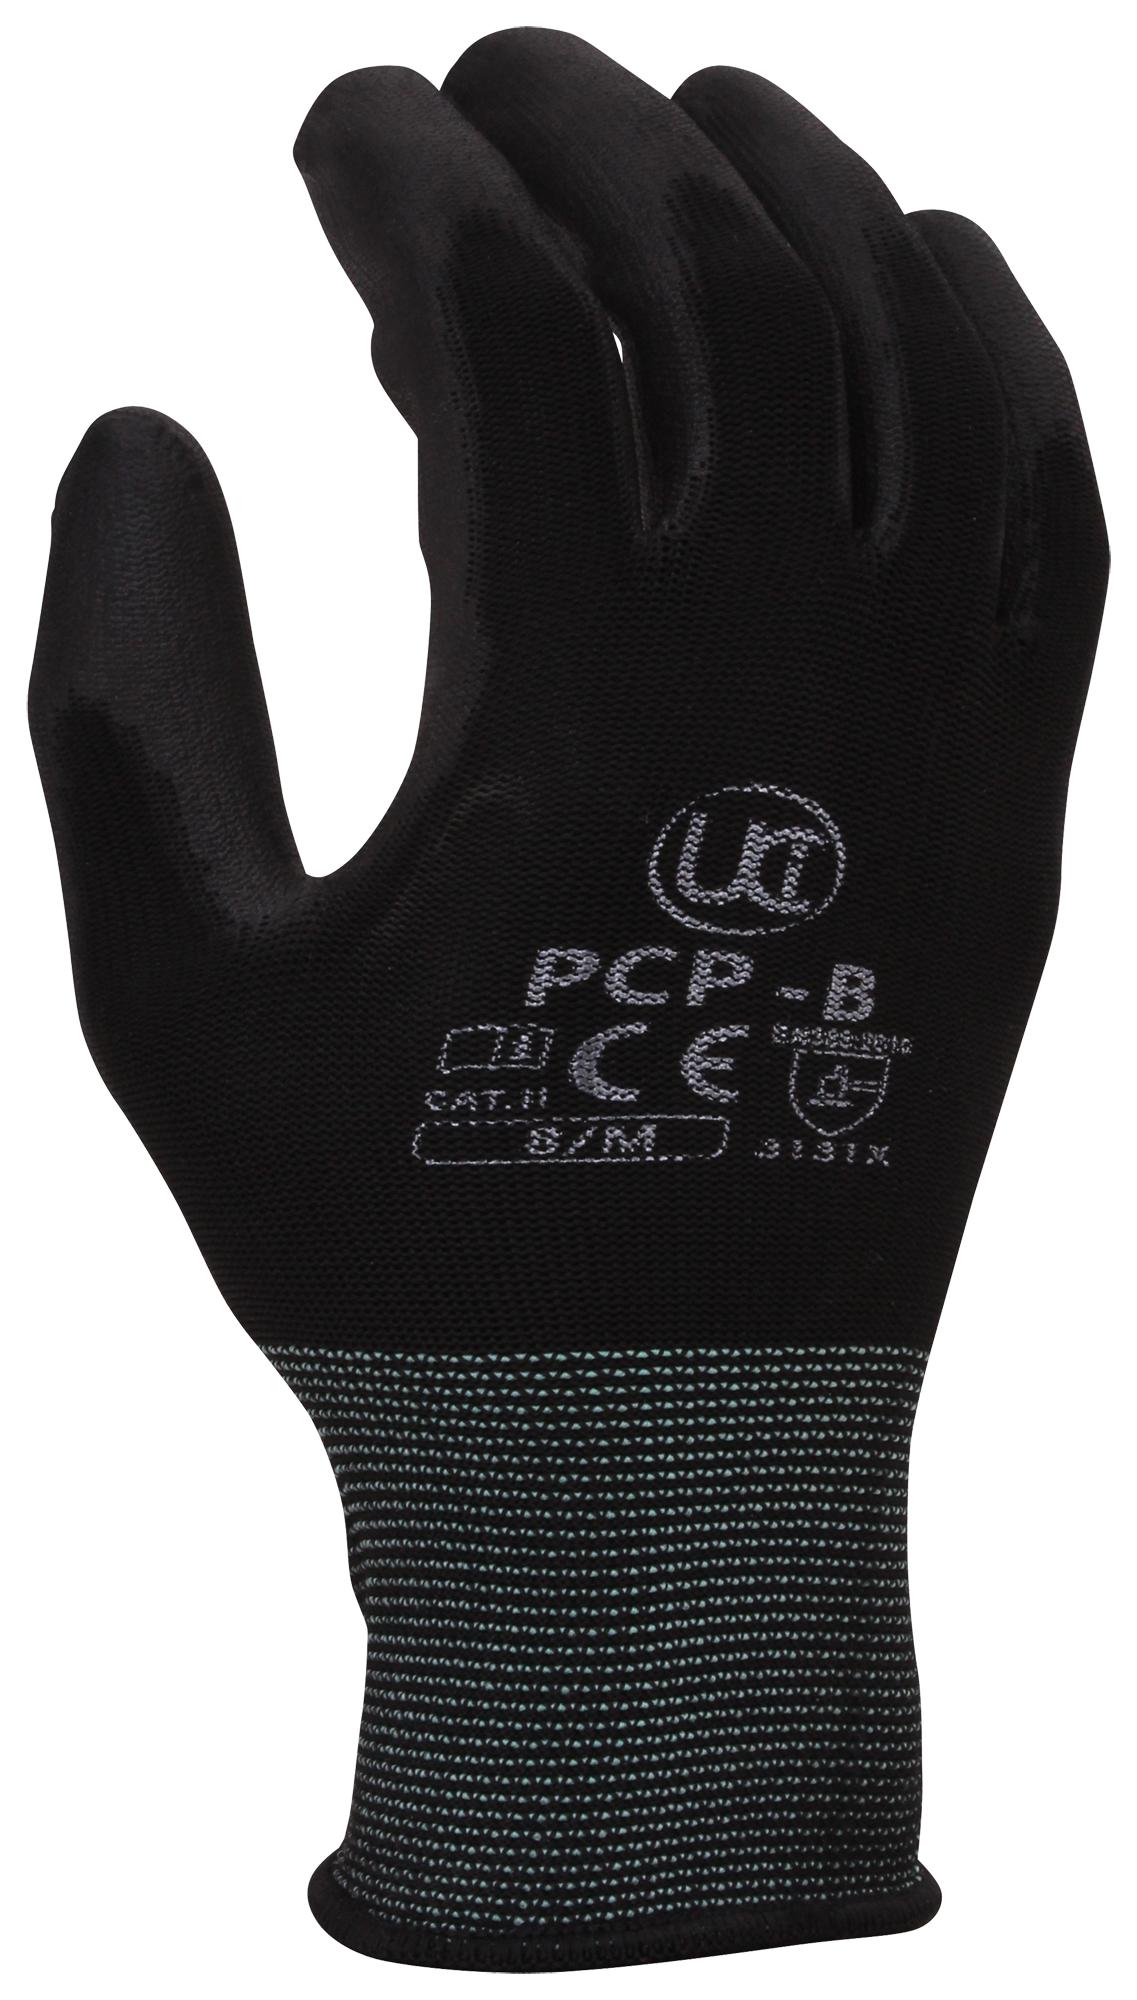 Uci G/pcp-B/07 Gloves, Pu Coated Polyester, Black, S